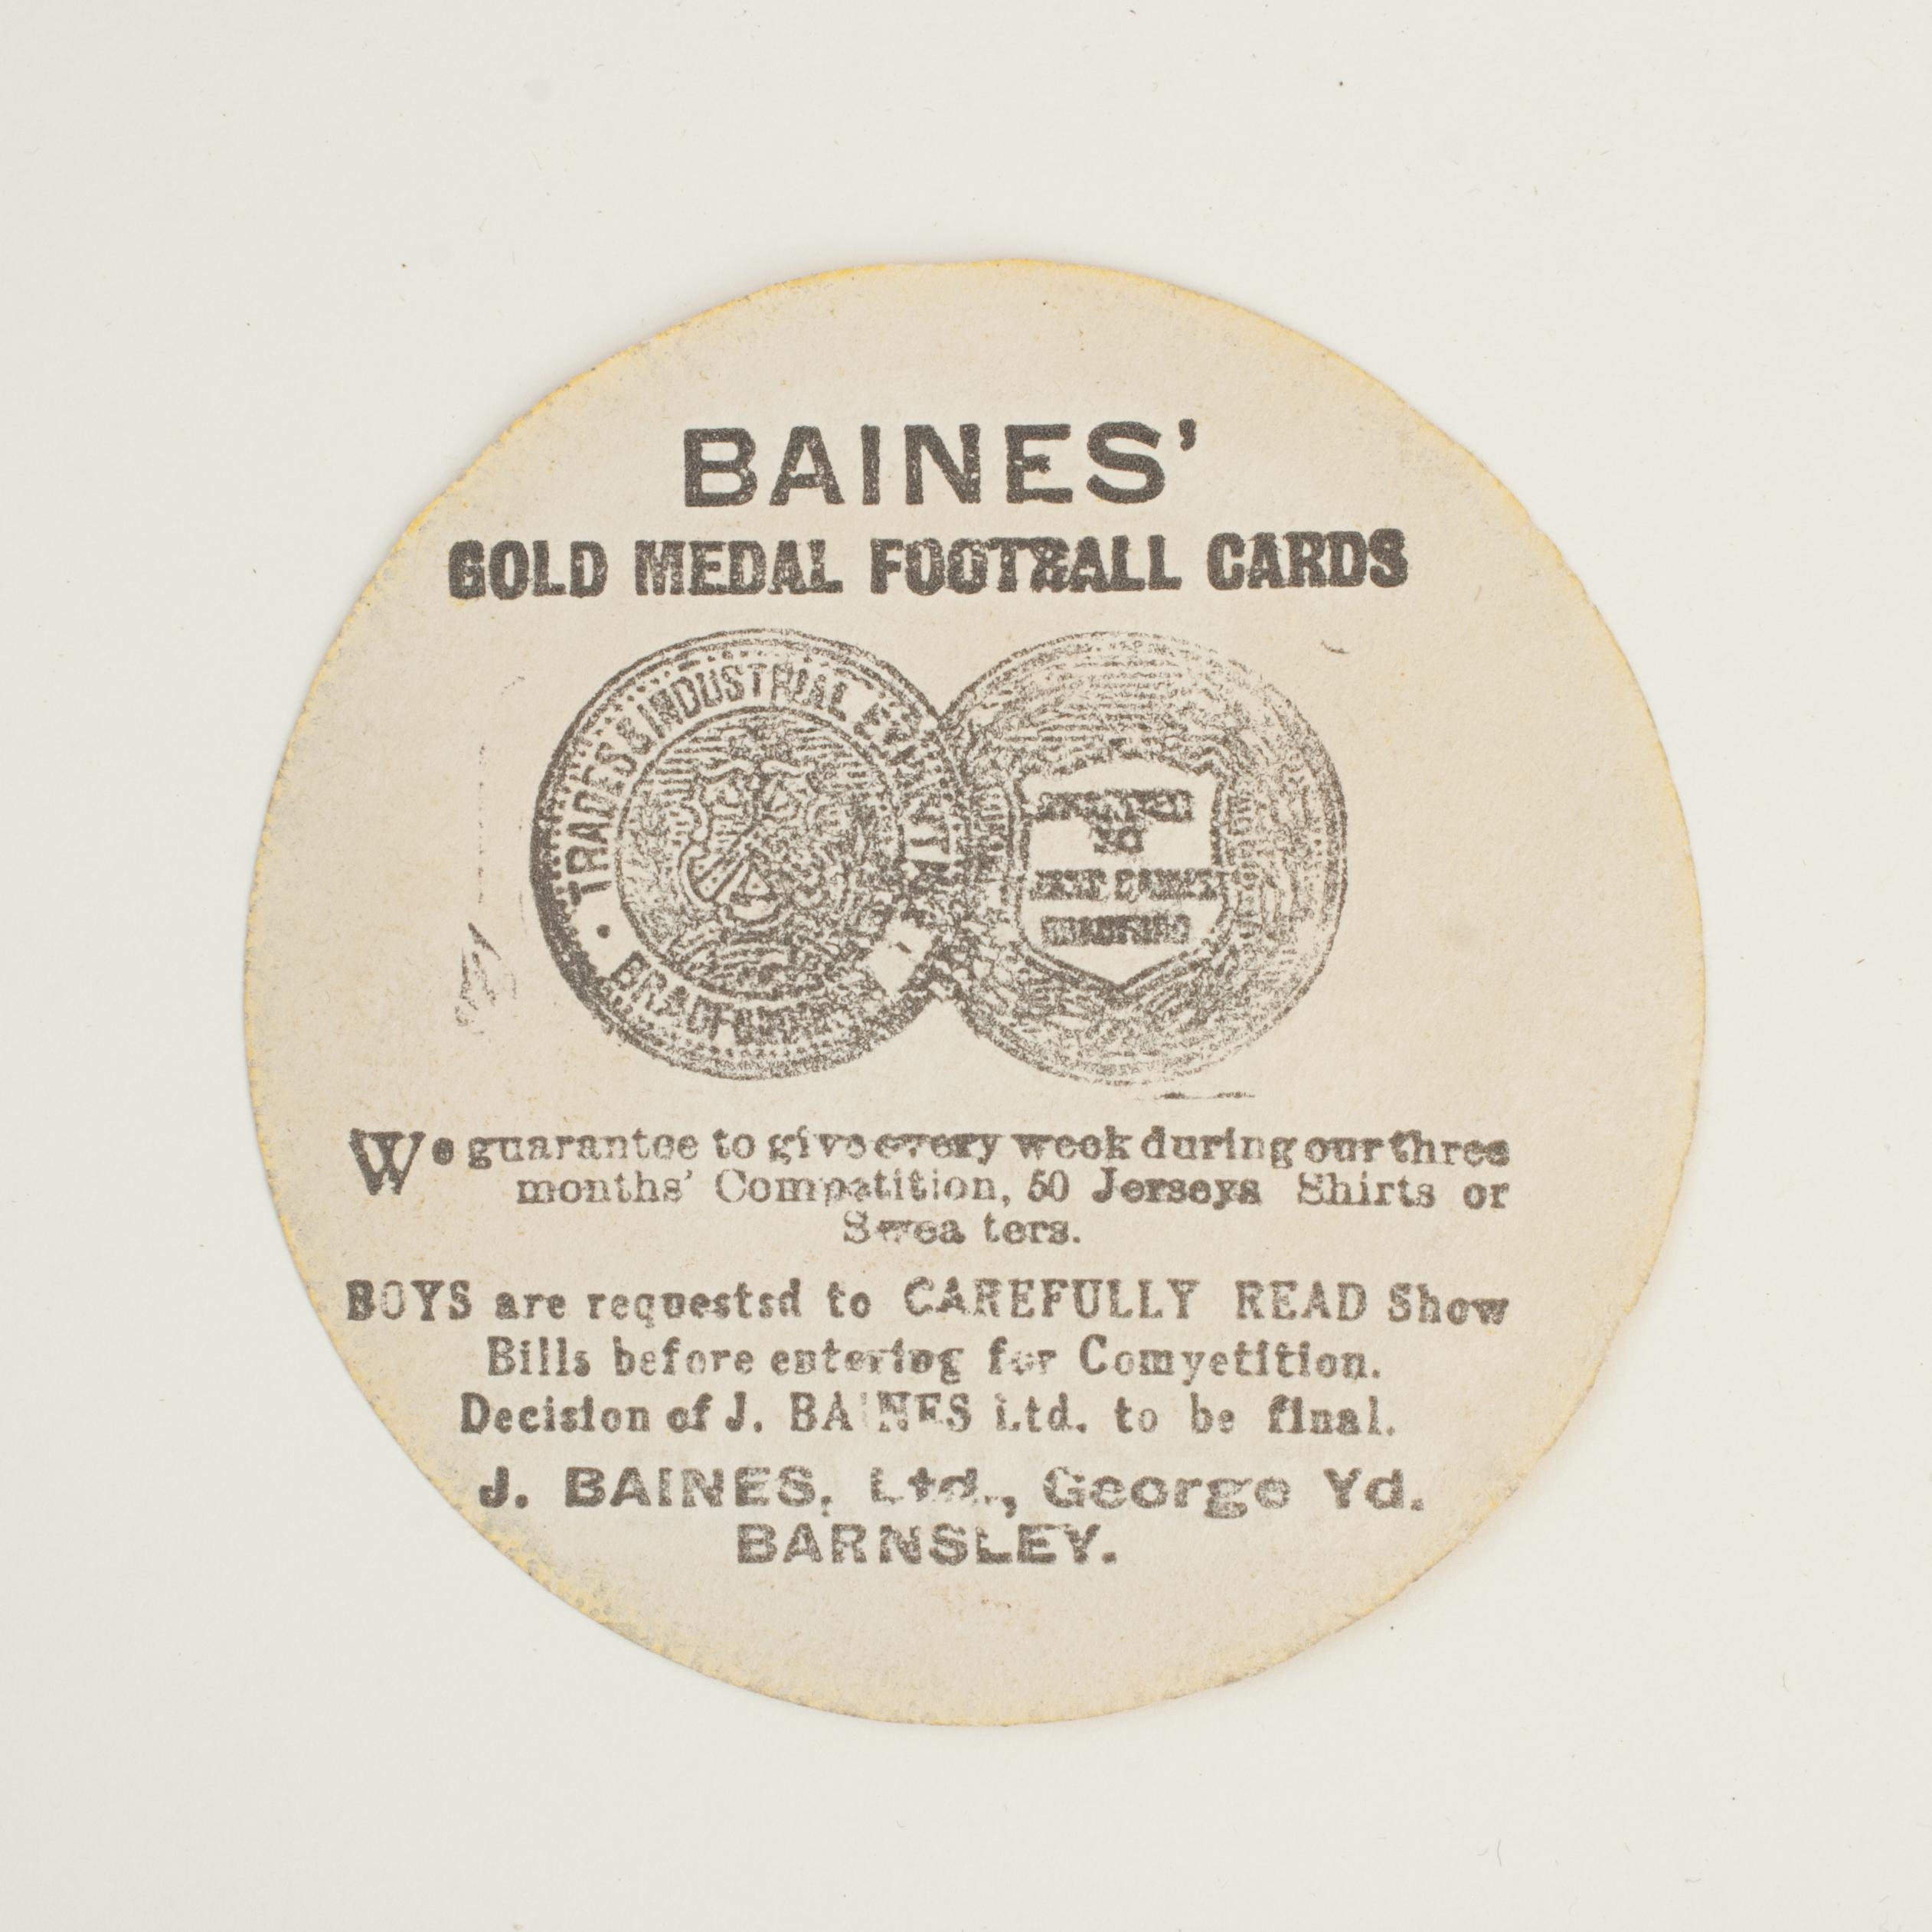 Baines football trade card, Rochdale. Well Centred.
A rare circular football trade card in the shape of a leather football ball. Made by the toy shop owner from Bradford, John Baines. Baines went on to produce not only football cards but eventually